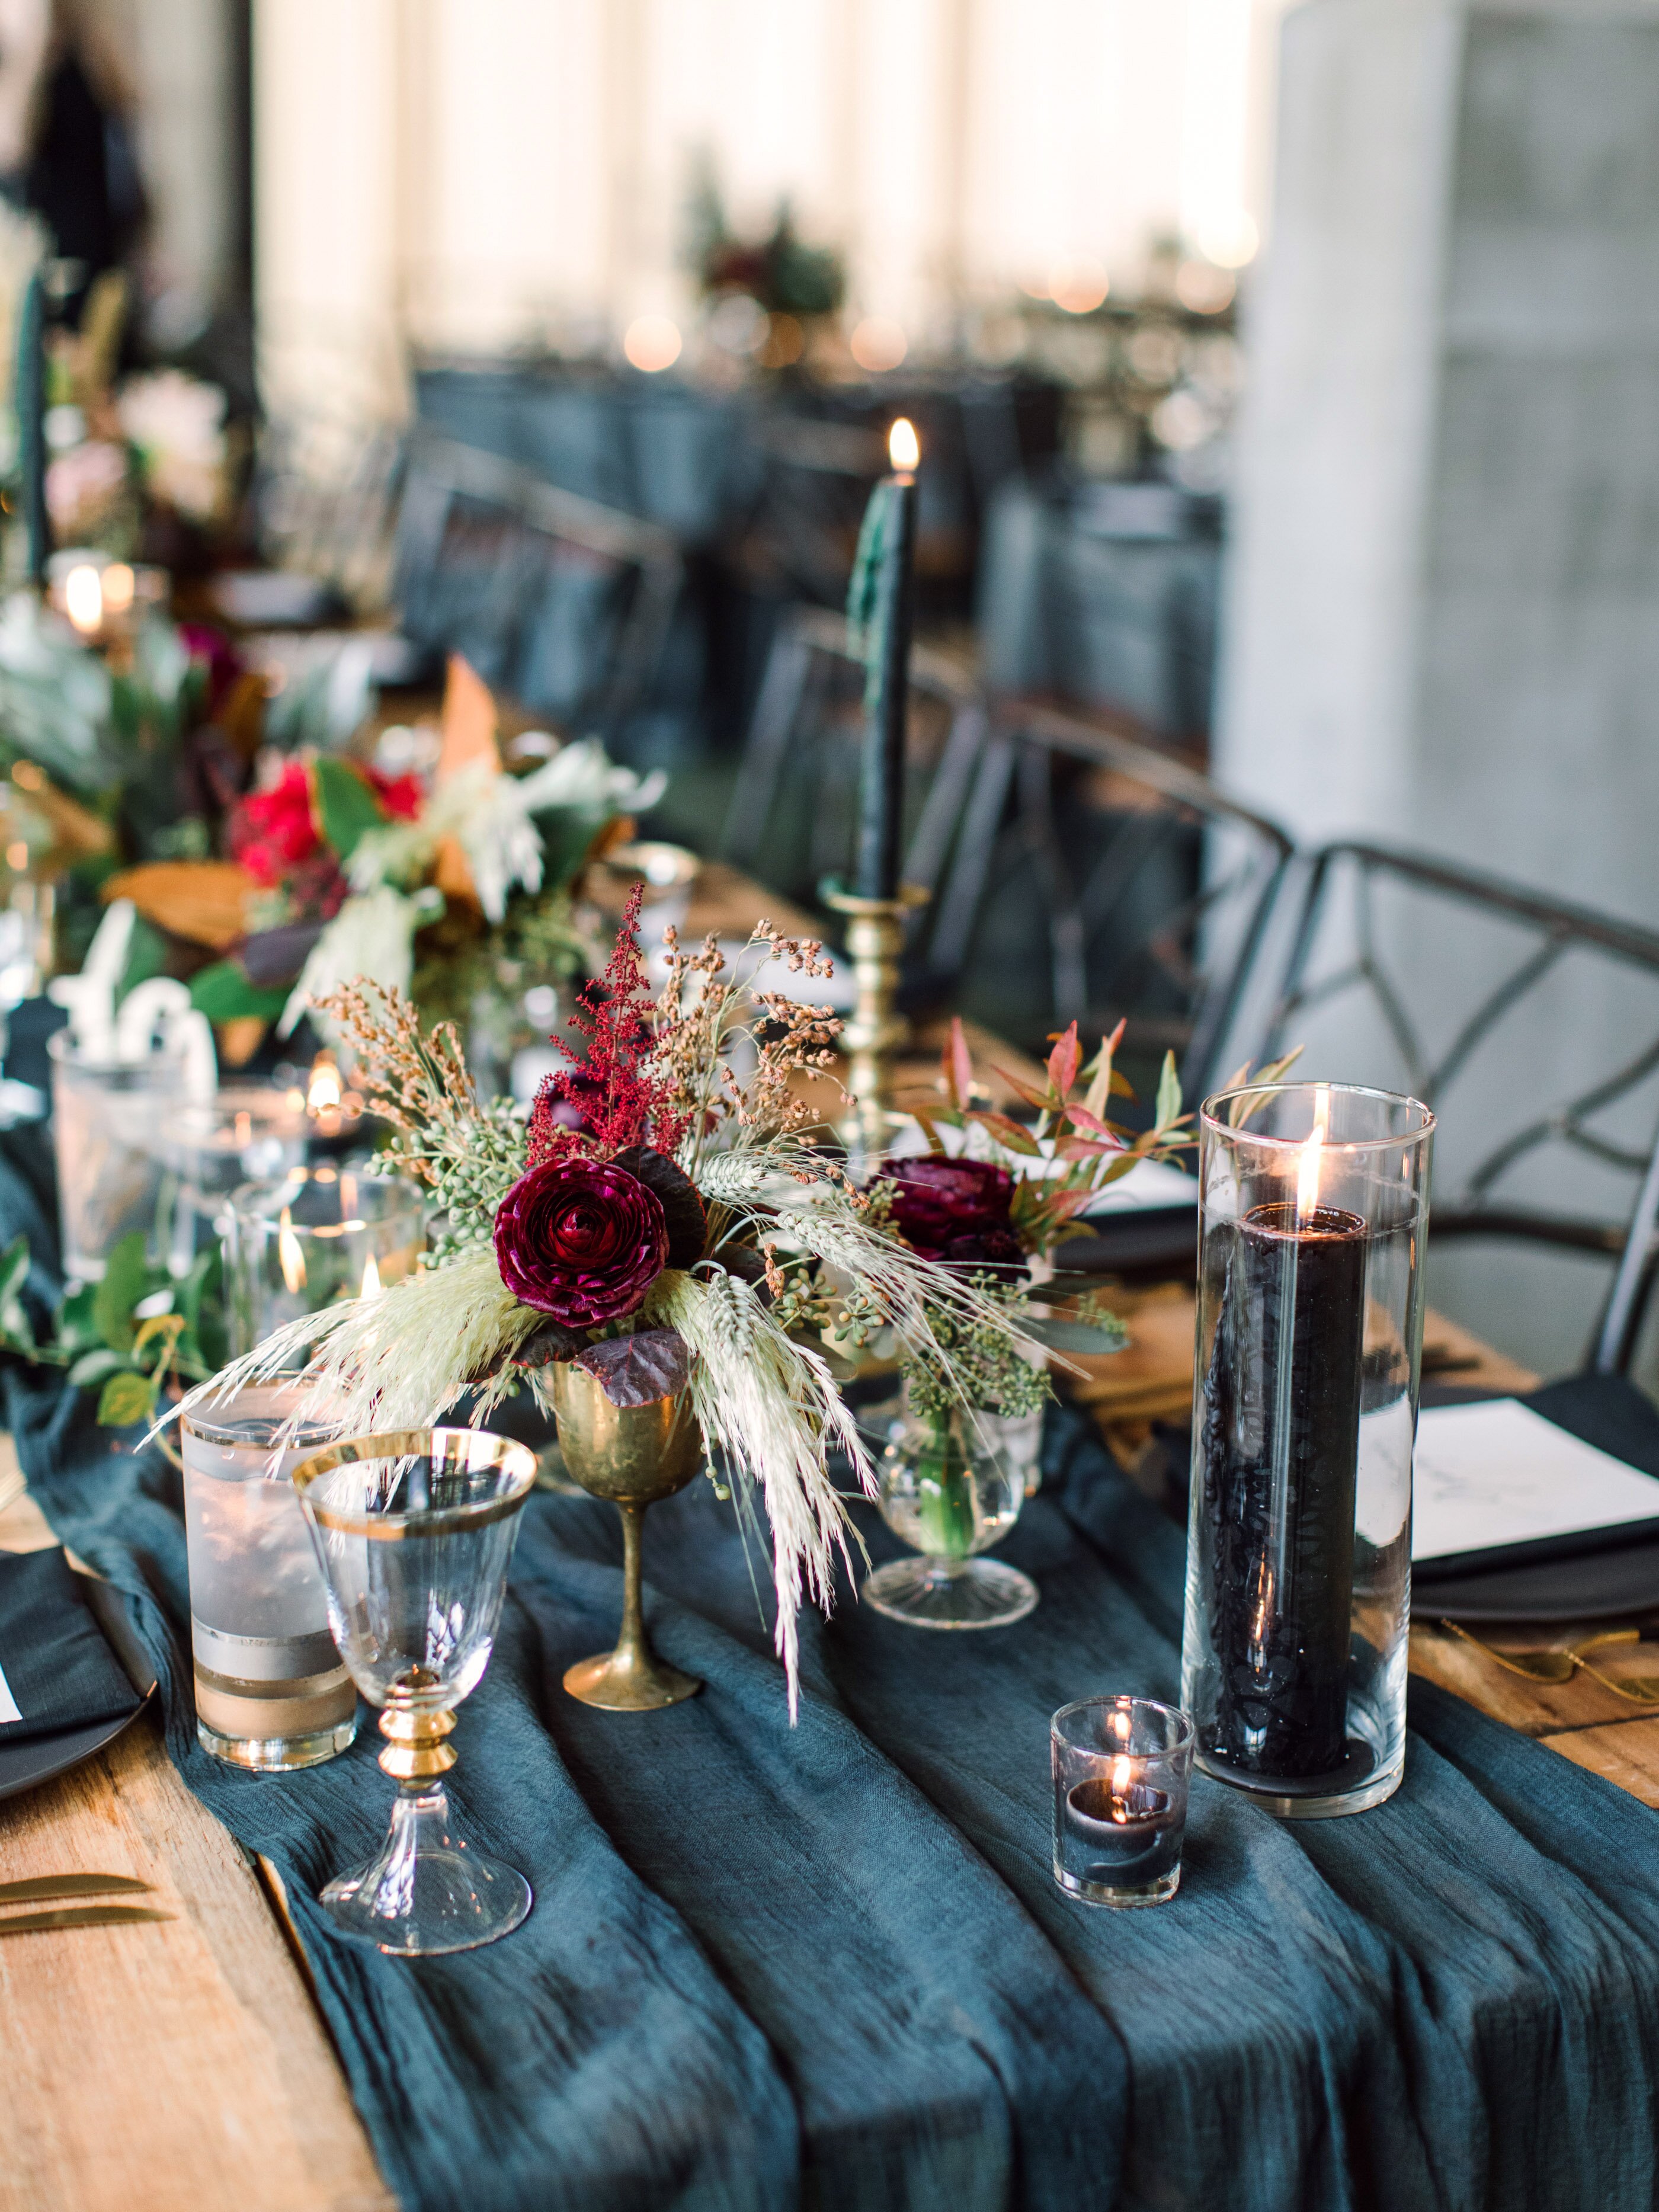 25 Jewel Toned Wedding Centerpieces Sure To Wow Your Guests